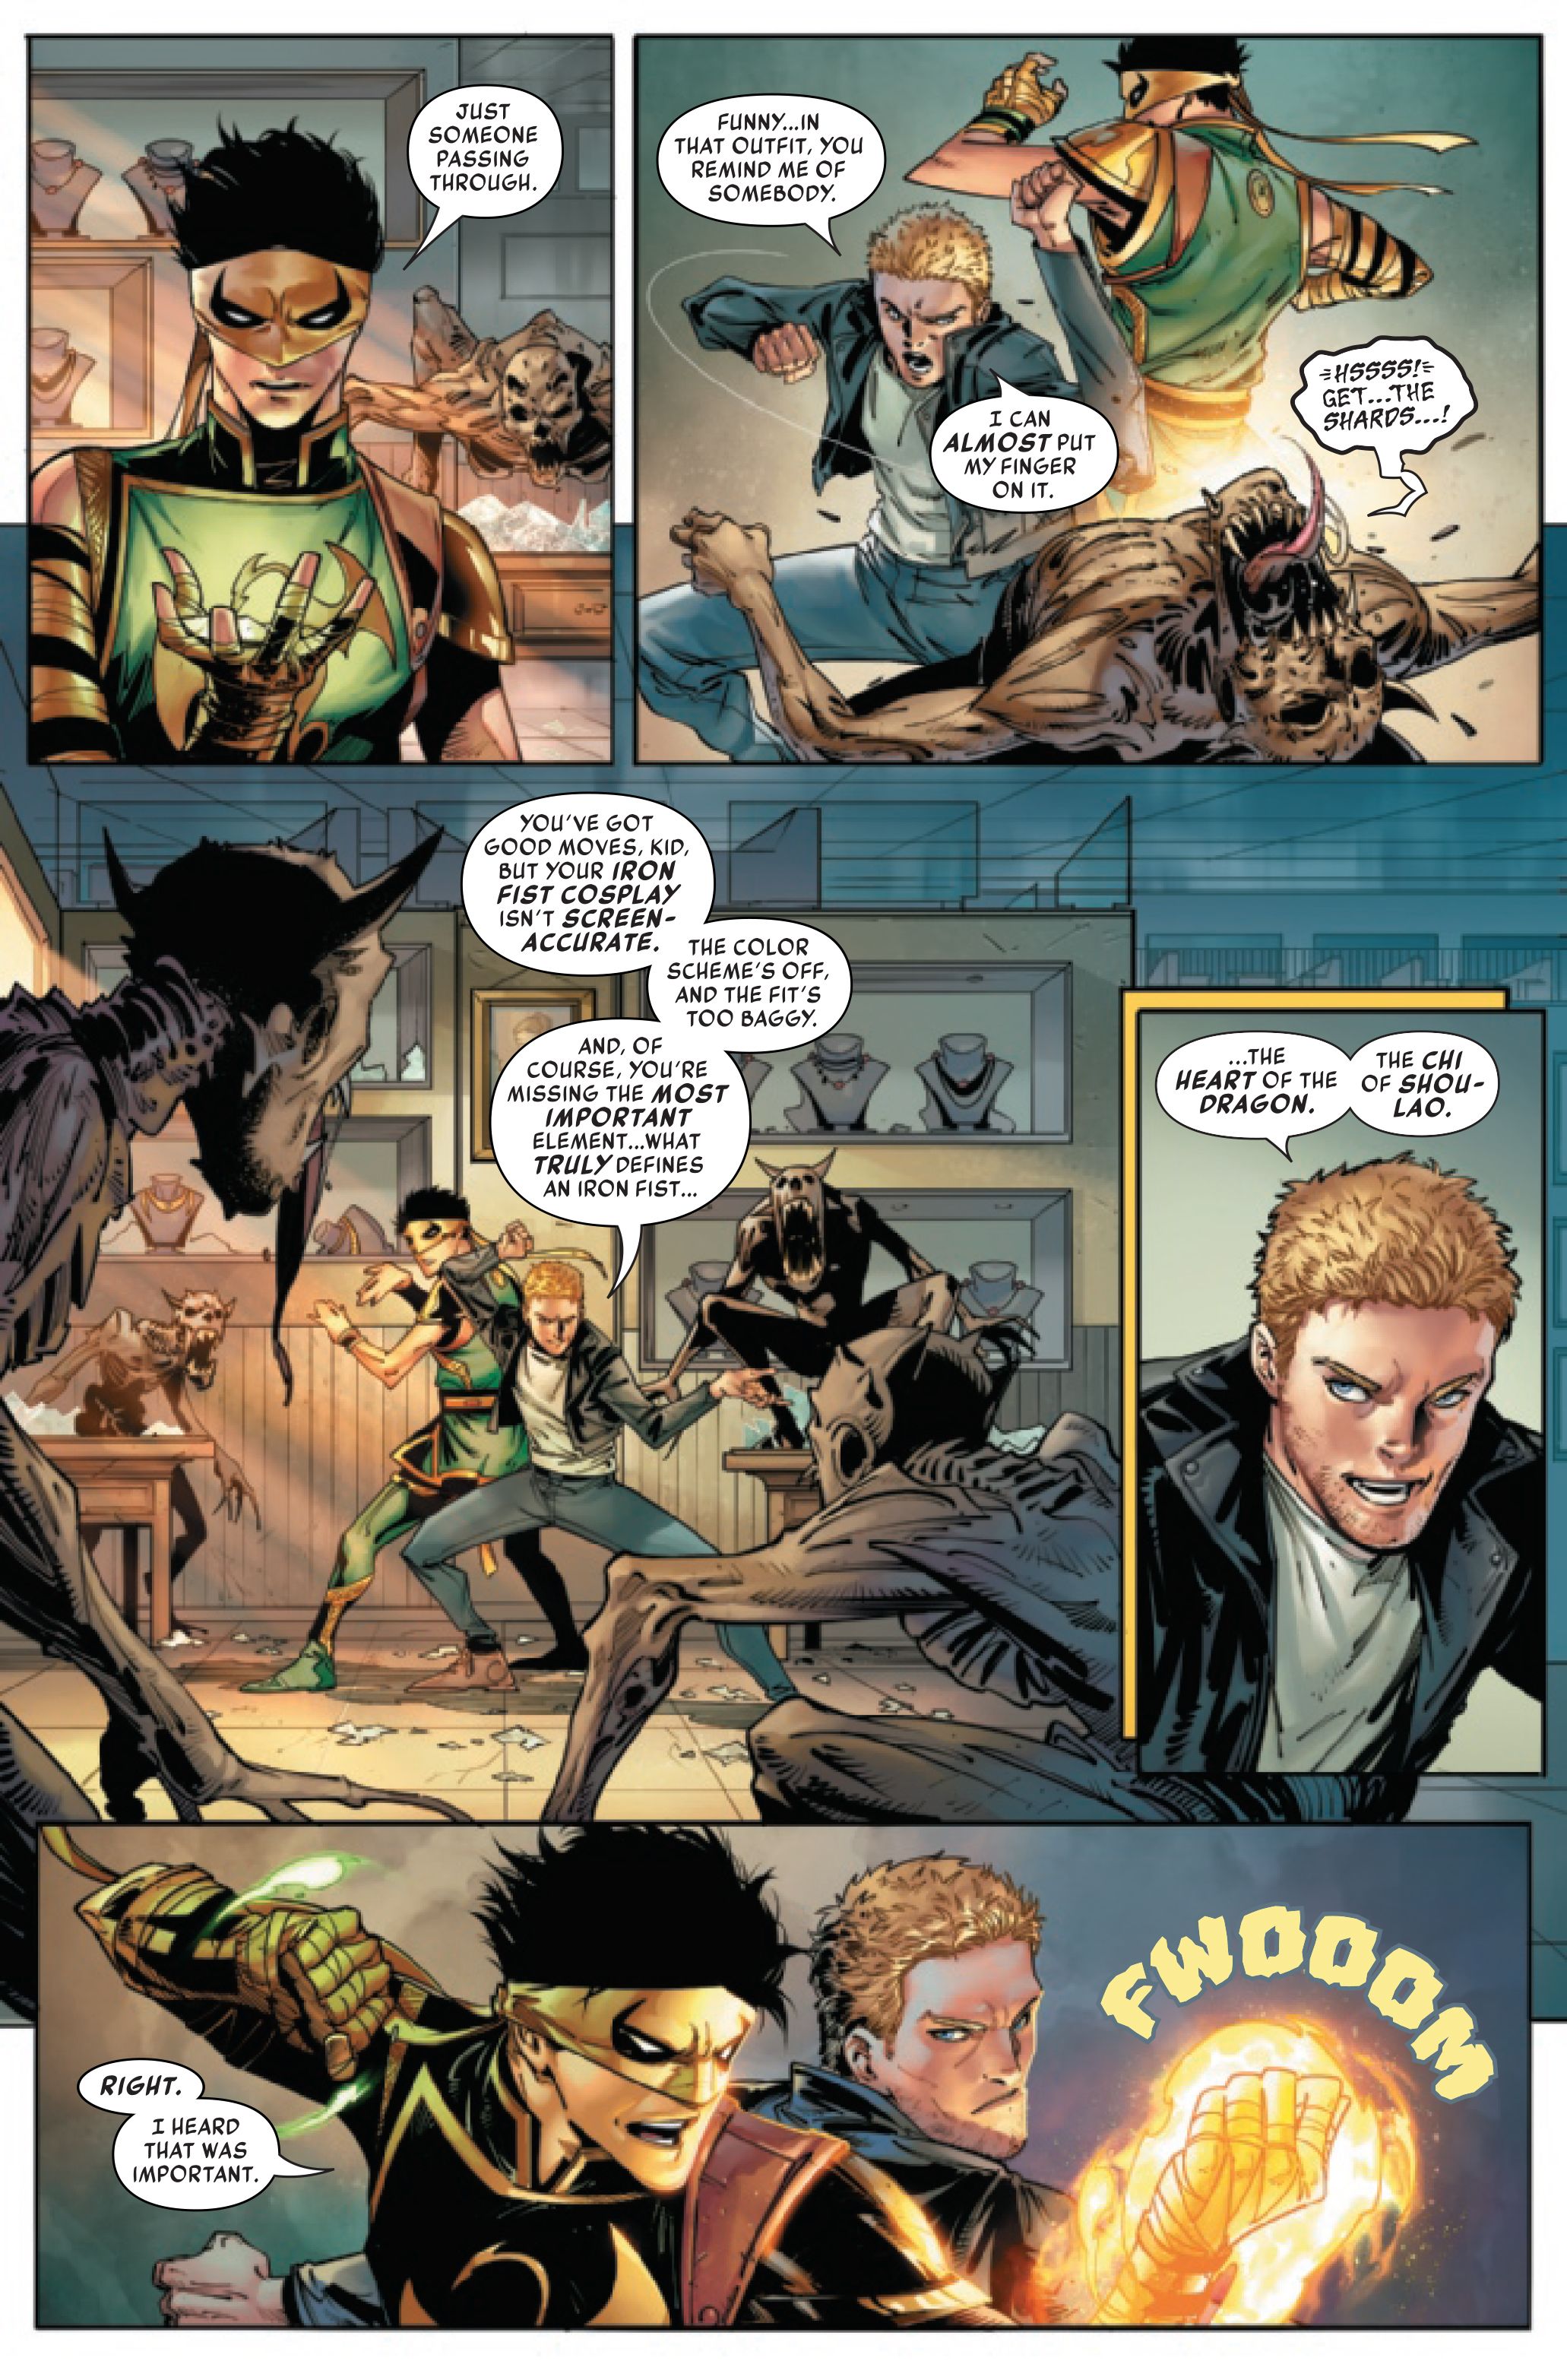 Page 5 of Iron Fist #1